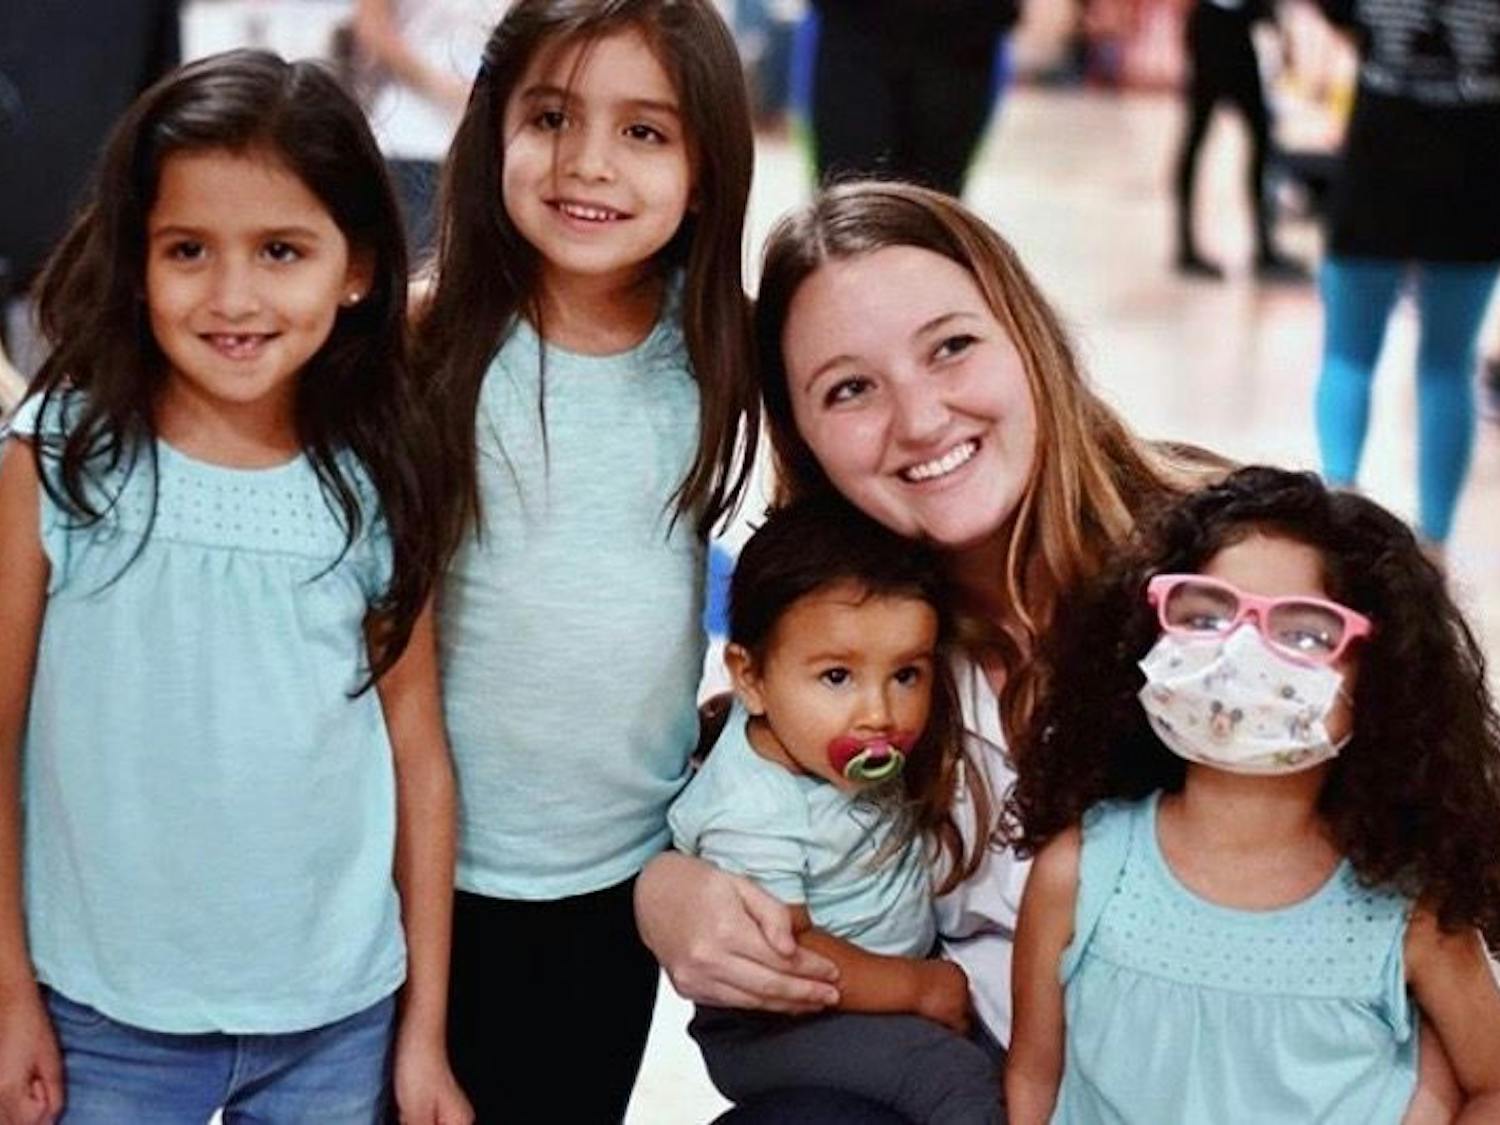 Madison Grasty smiles for a group photo with Izabella Neira (far right) and her three sisters (from left) Jessy, Mia and Alynna during a high school Dance Marathon.